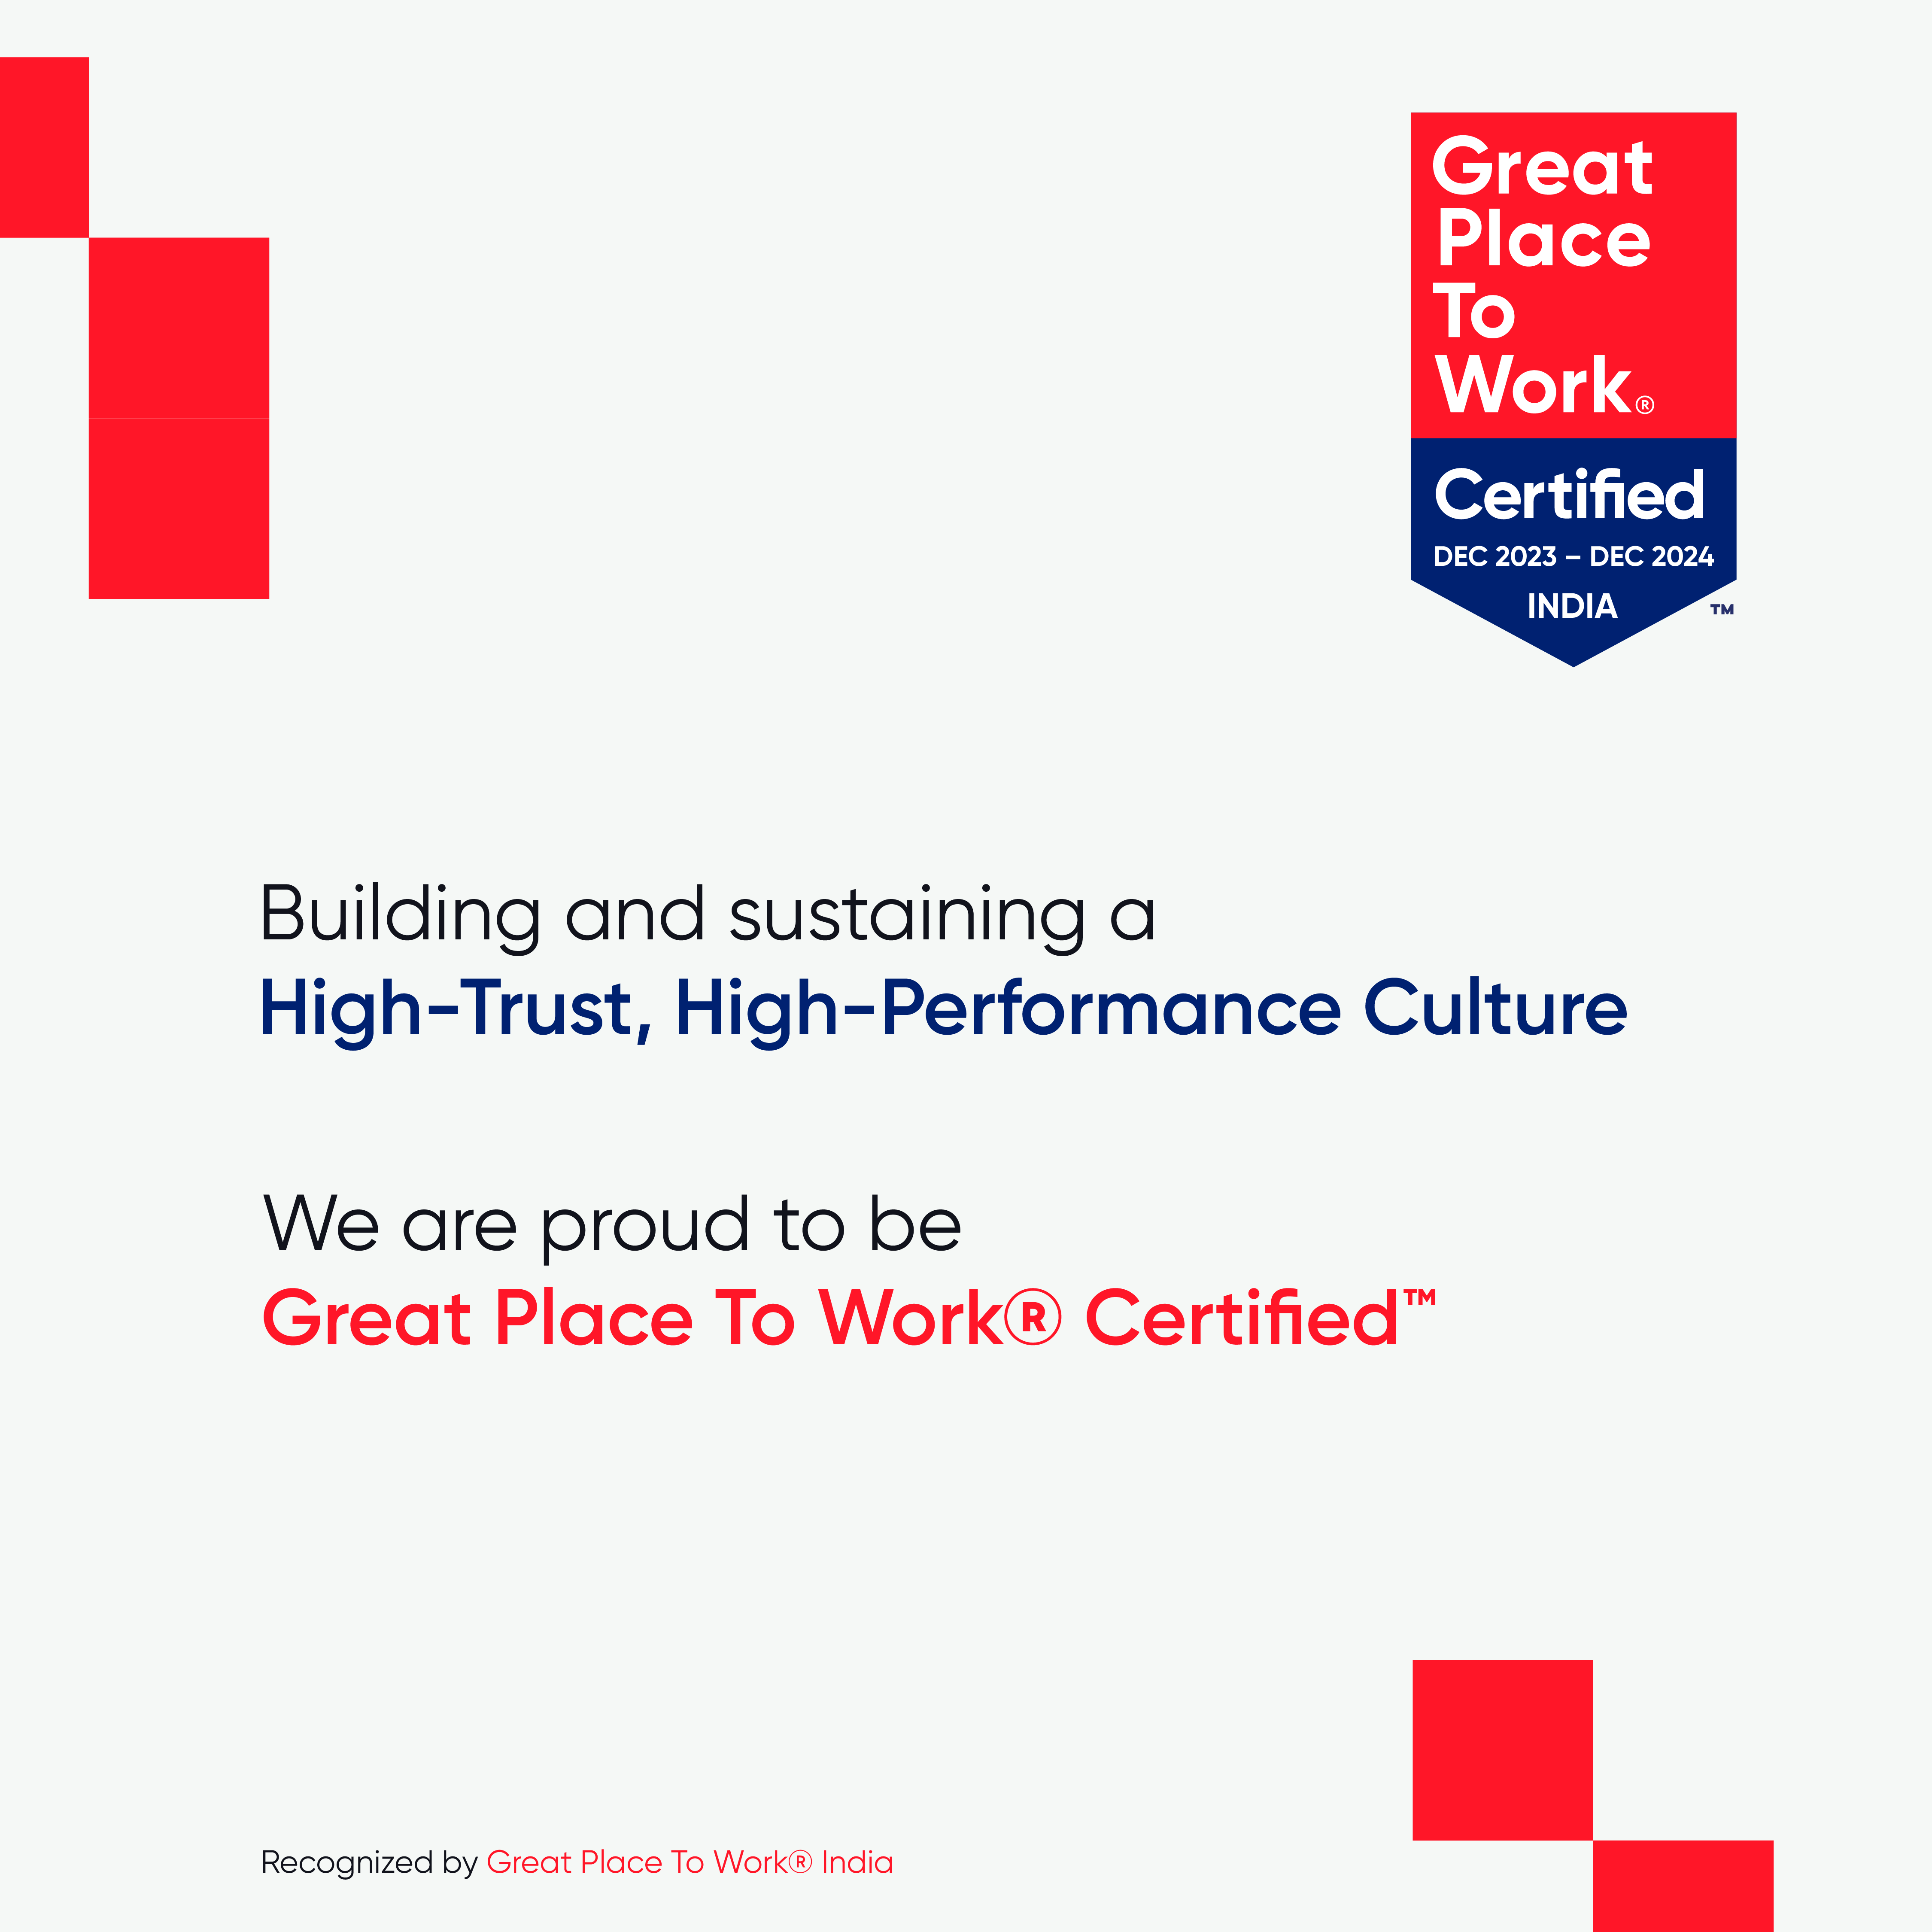 Coca-Cola Hong Kong certified as a Great Place to Work® - SME &  Entrepreneurship Magazine